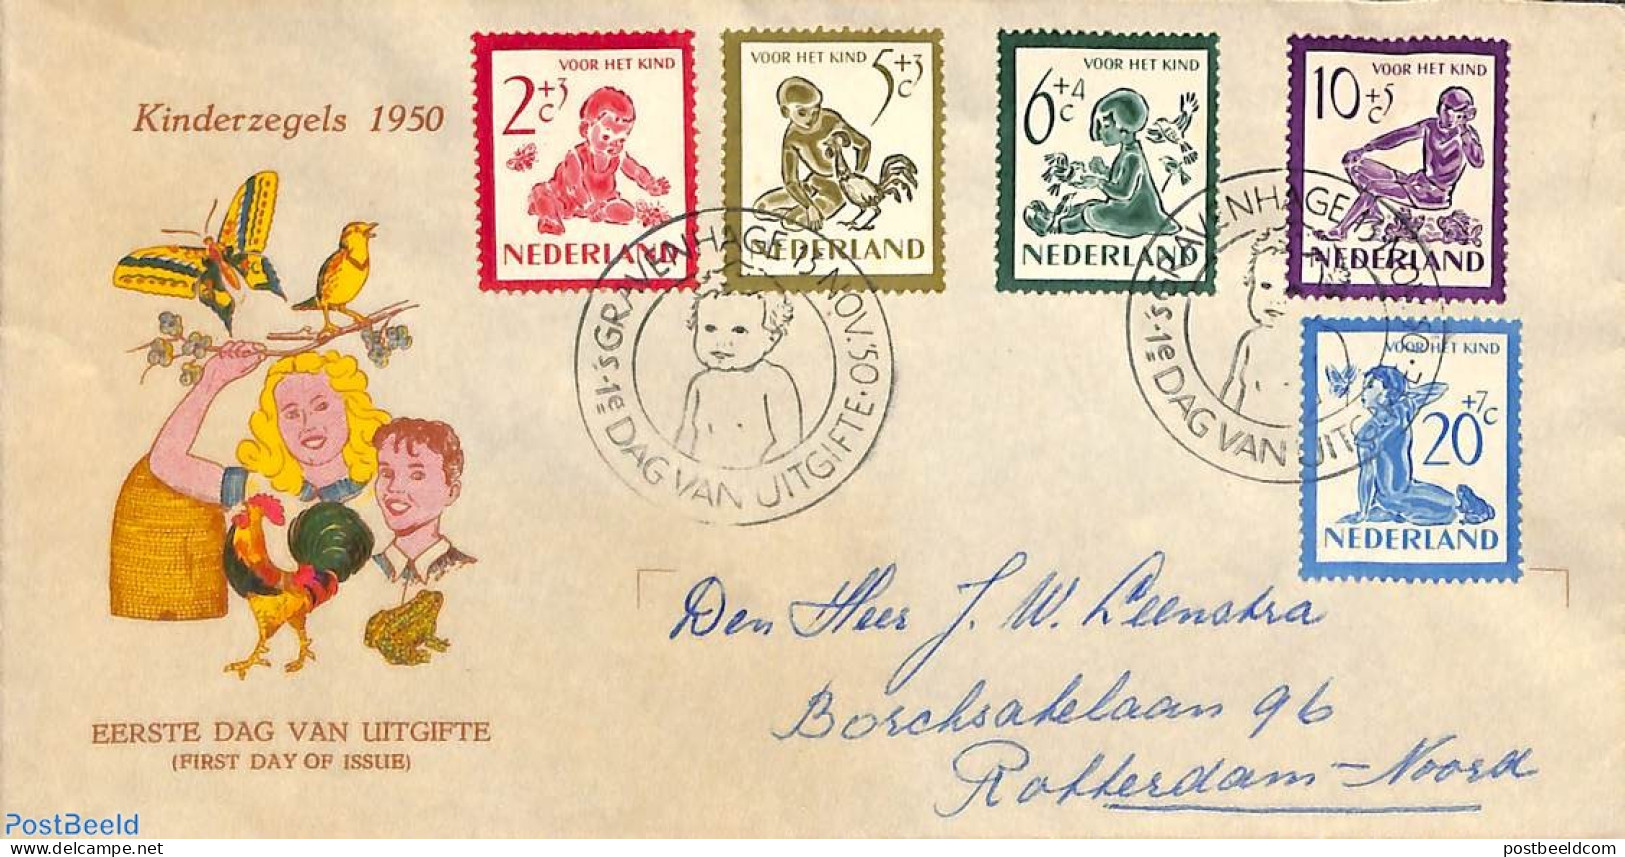 Netherlands 1950 Child Welfare 5v, FDC, Closed Flap, Written Address, First Day Cover - Lettres & Documents